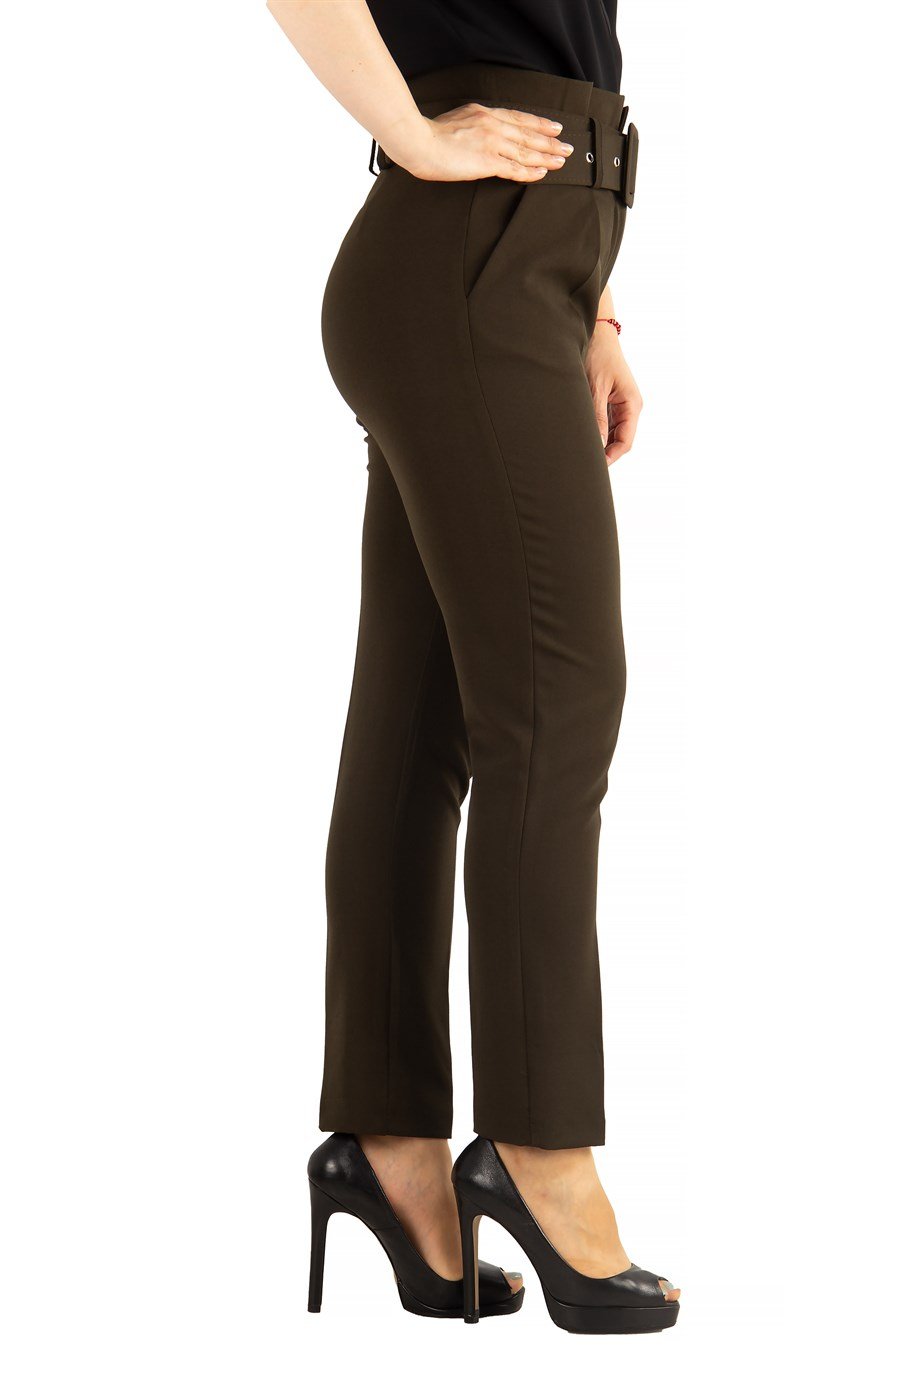 Trousers With Matching Belt Casual Formal Office Pants For Ladies - Khaki -  Wholesale Womens Clothing Vendors For Boutiques